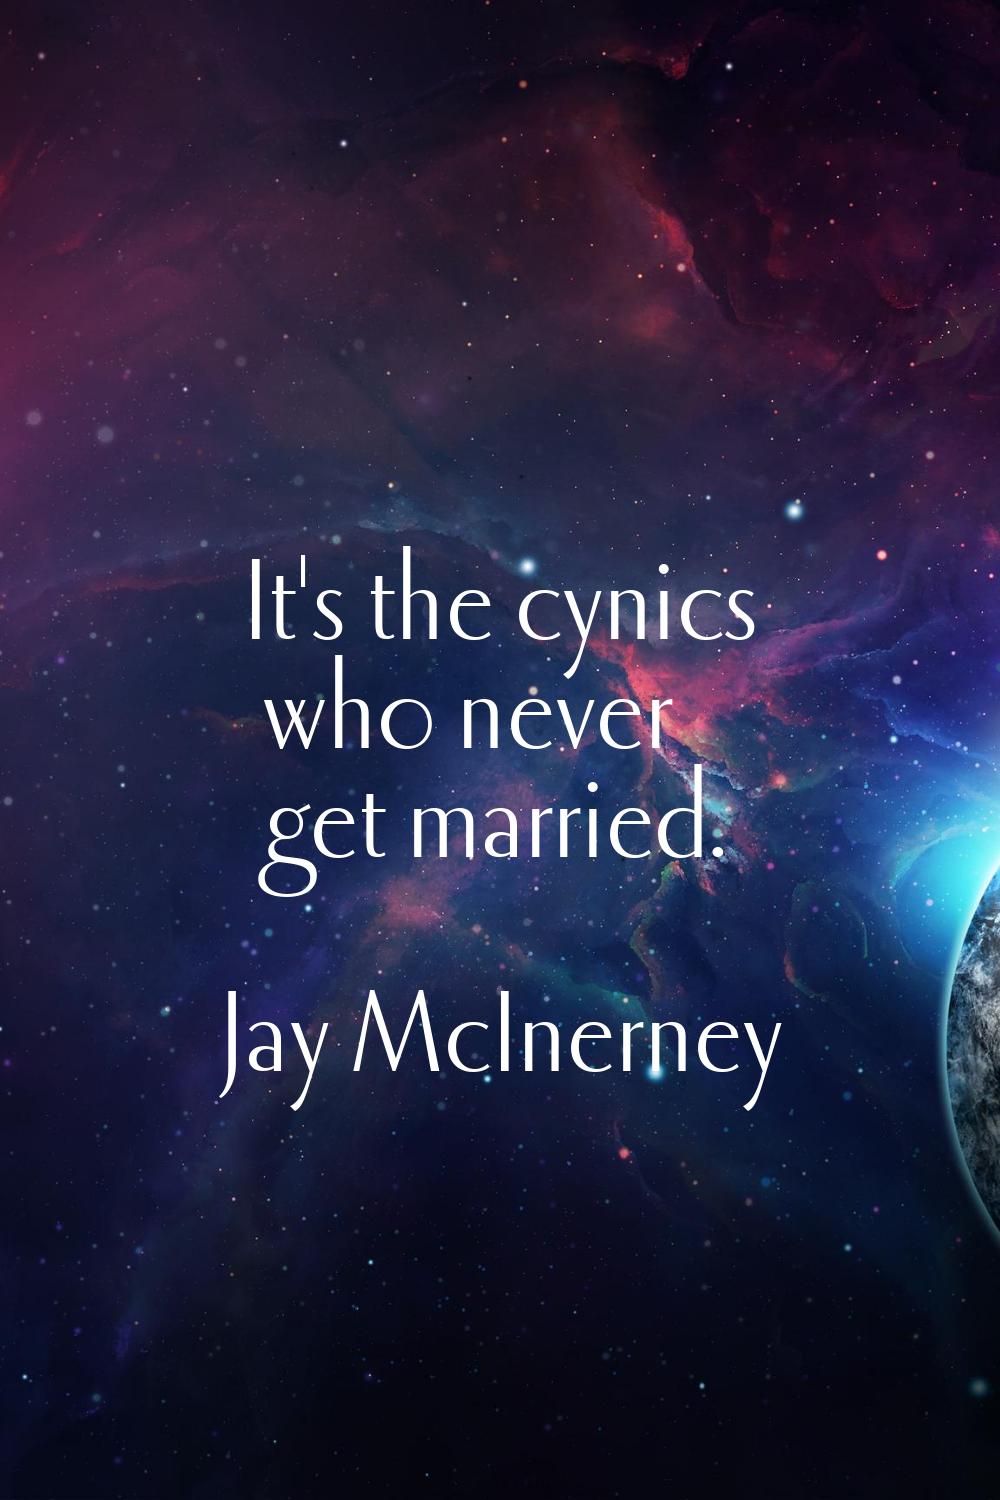 It's the cynics who never get married.